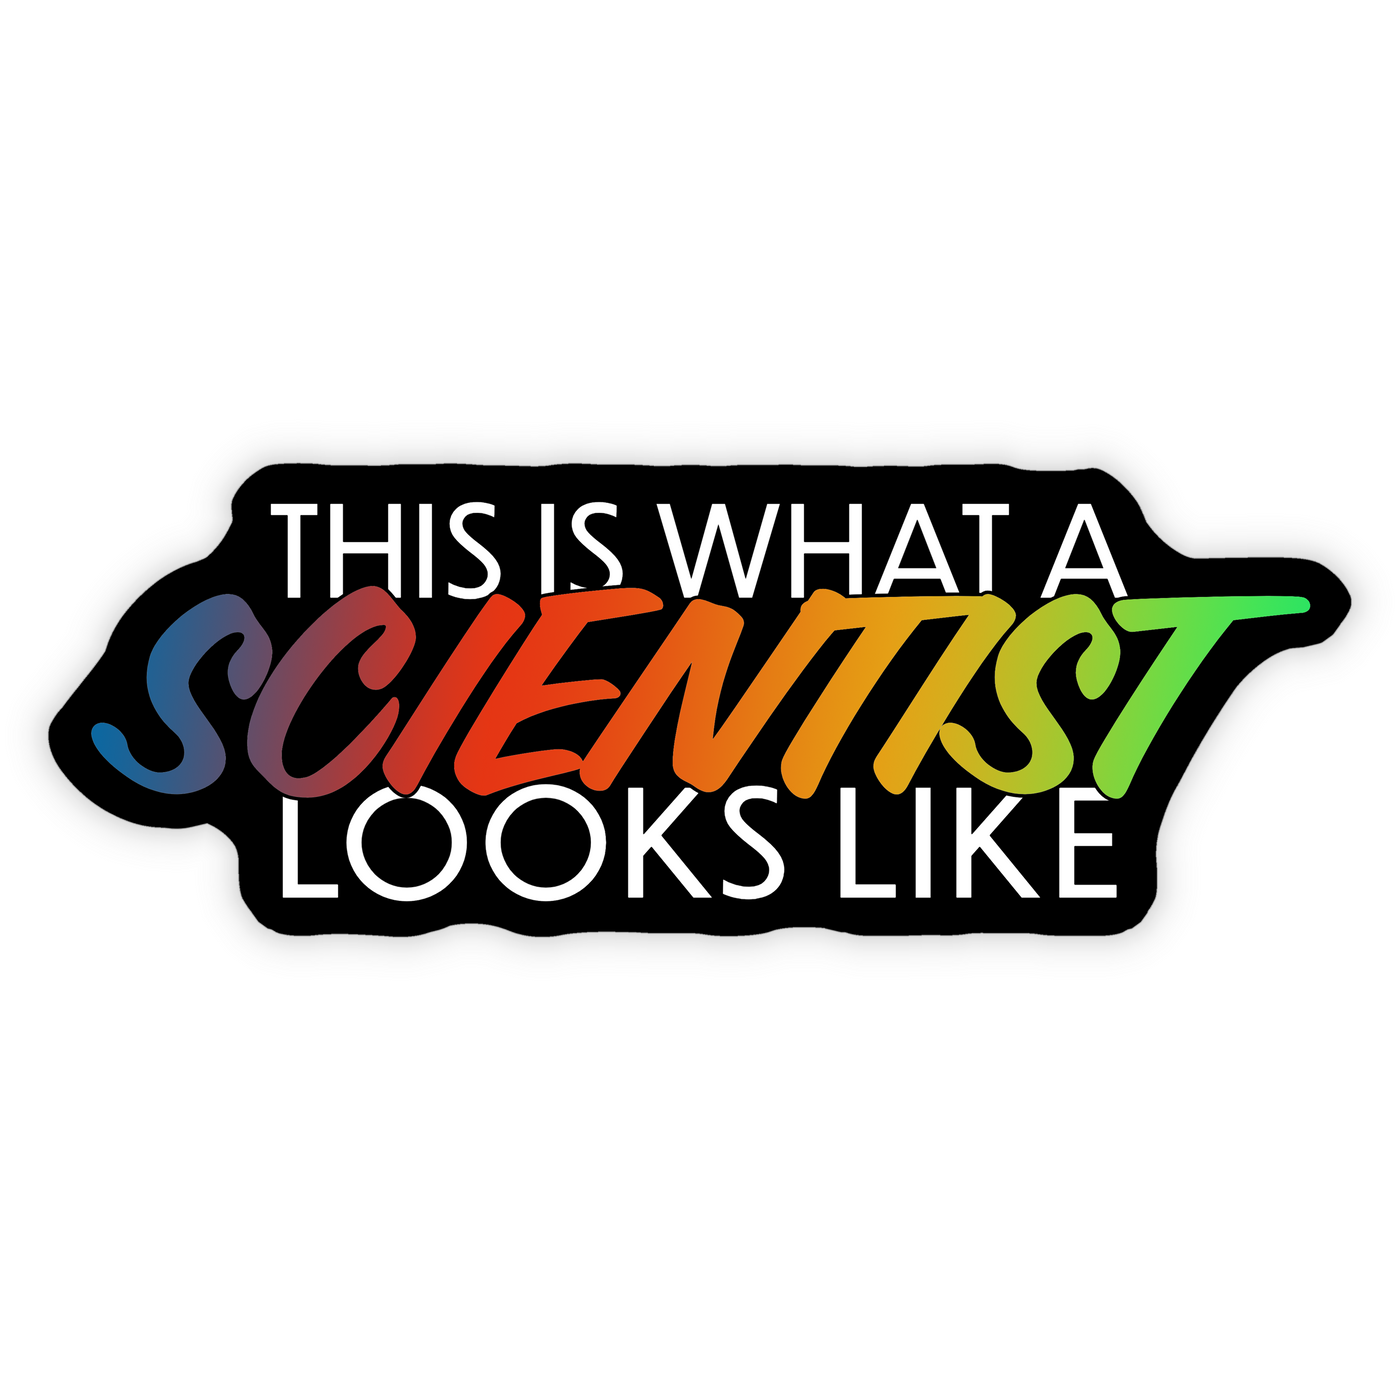 This is What a Scientist Looks Like - Vinyl Sticker